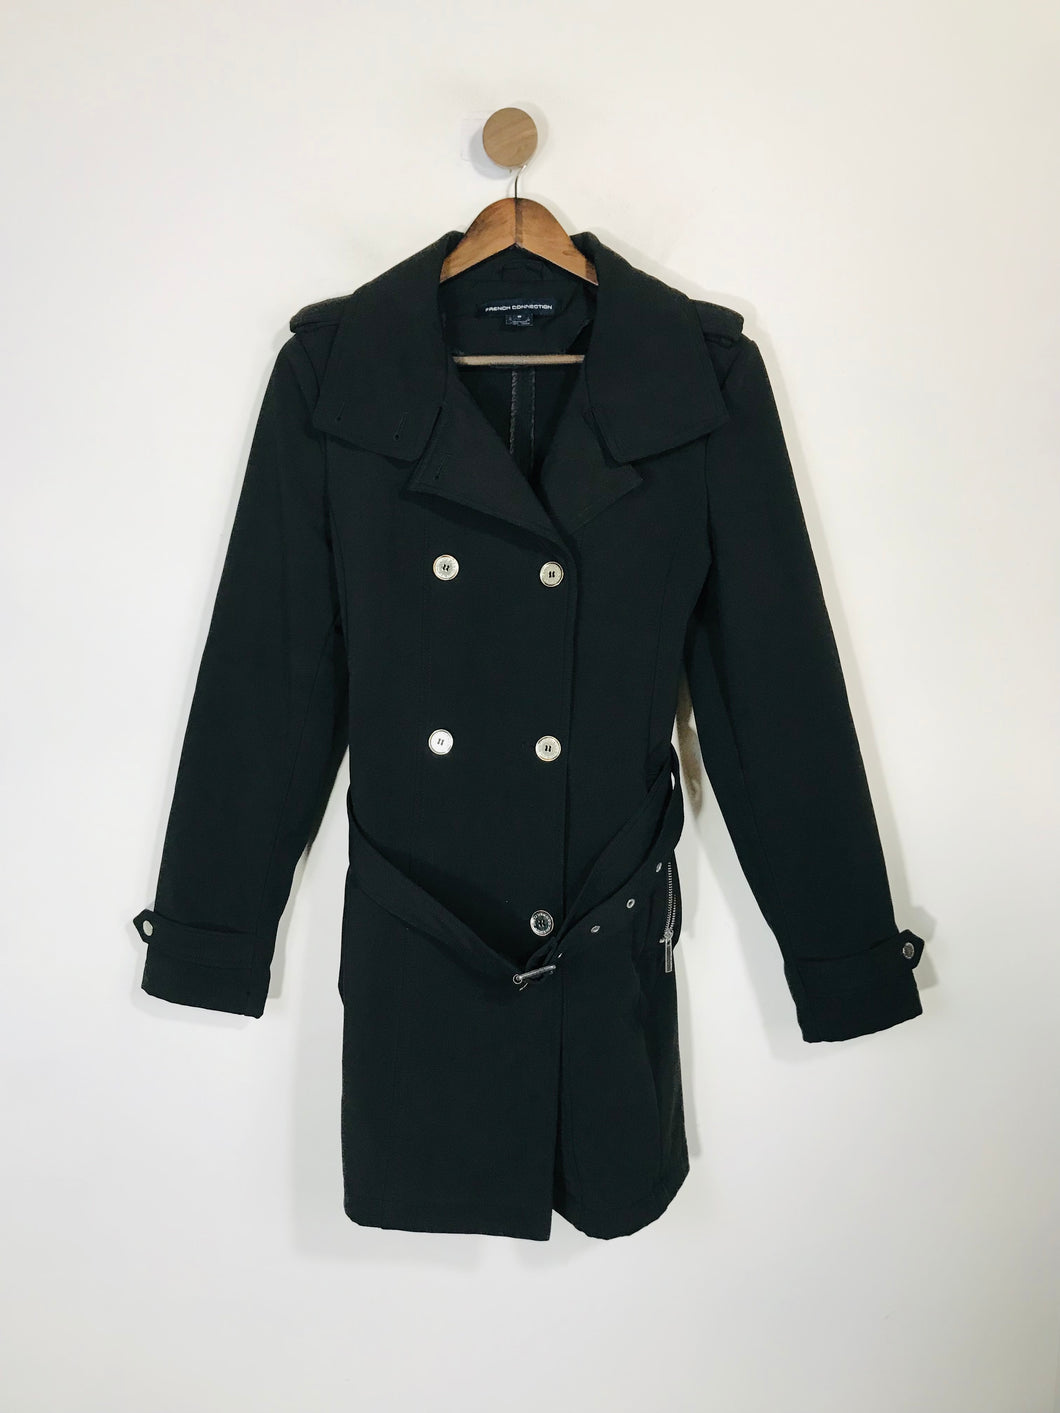 French Connection Women's Trench Coat | M UK10-12 | Black